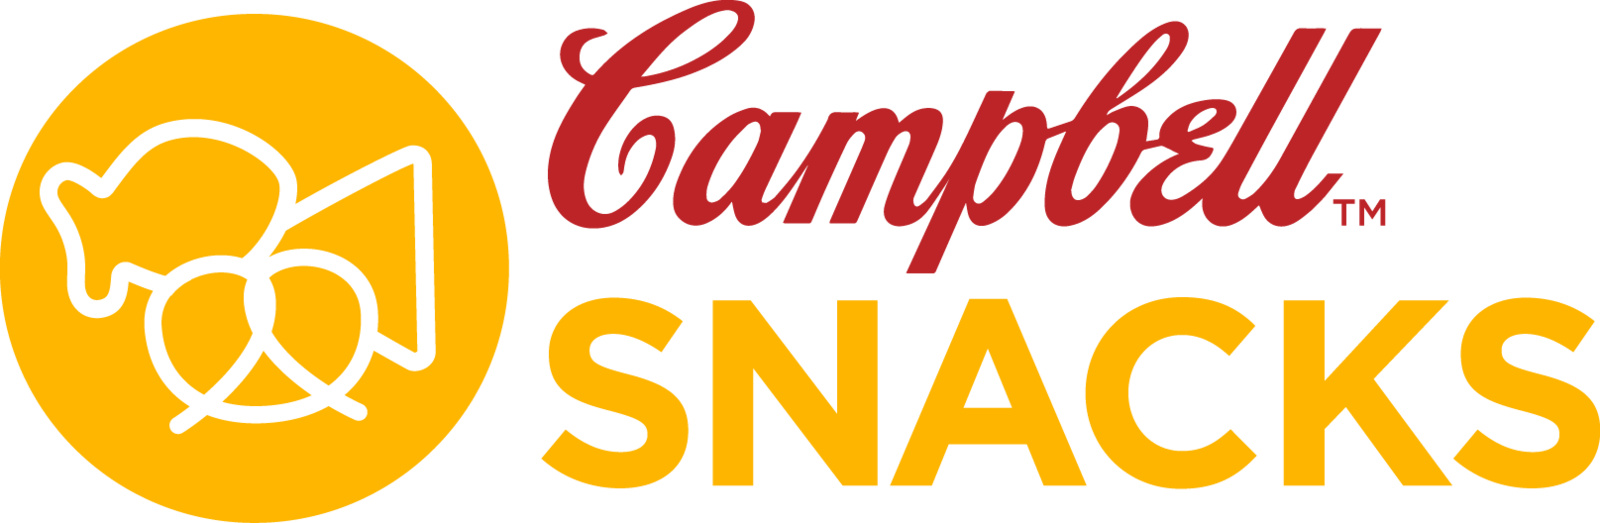 CAMPBELL_SNACKS